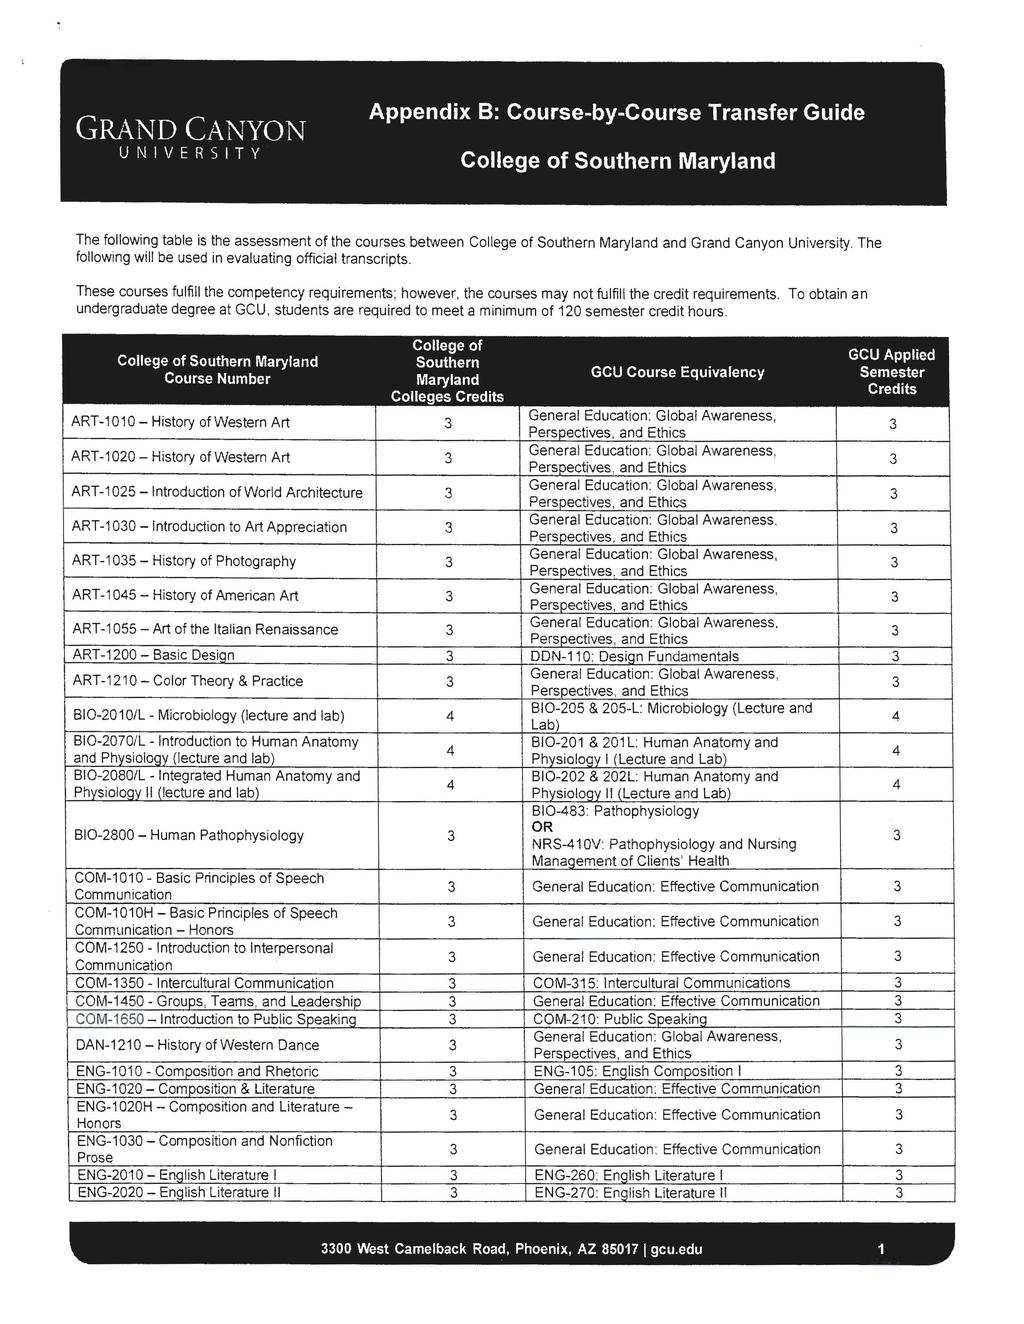 GRAND CANYON UNIVER S ITY Appendix 8: Course-by-Course Transfer Guide The following table is the assessment of the courses between and Grand Canyon University.